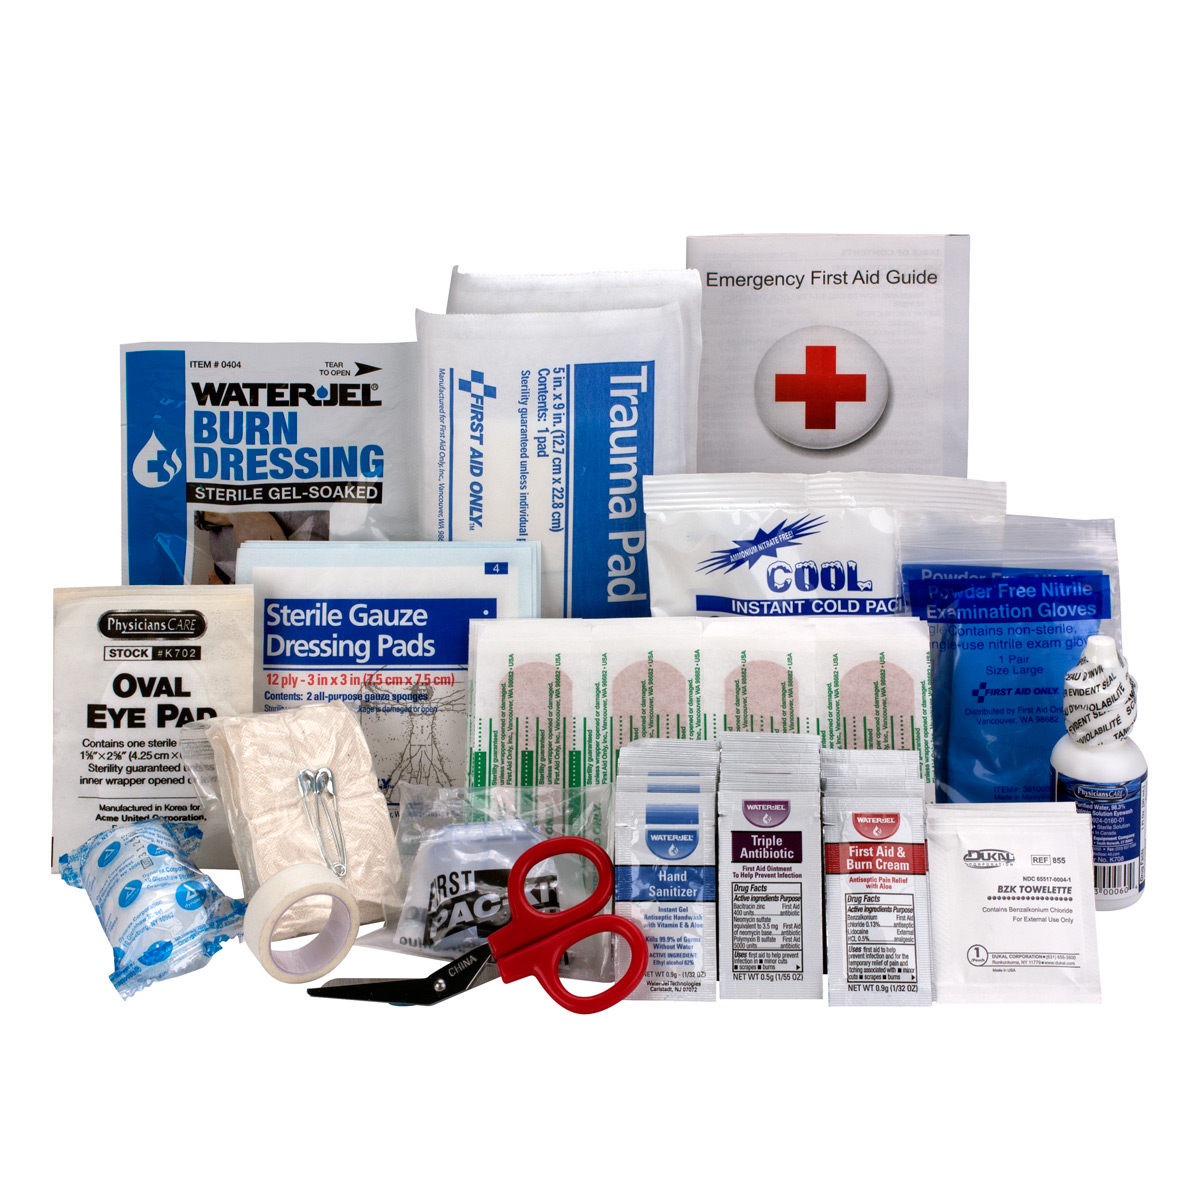 ANSI 2015 Compliant First Aid Kit Refill, Class A, 25 People, 89 Pieces